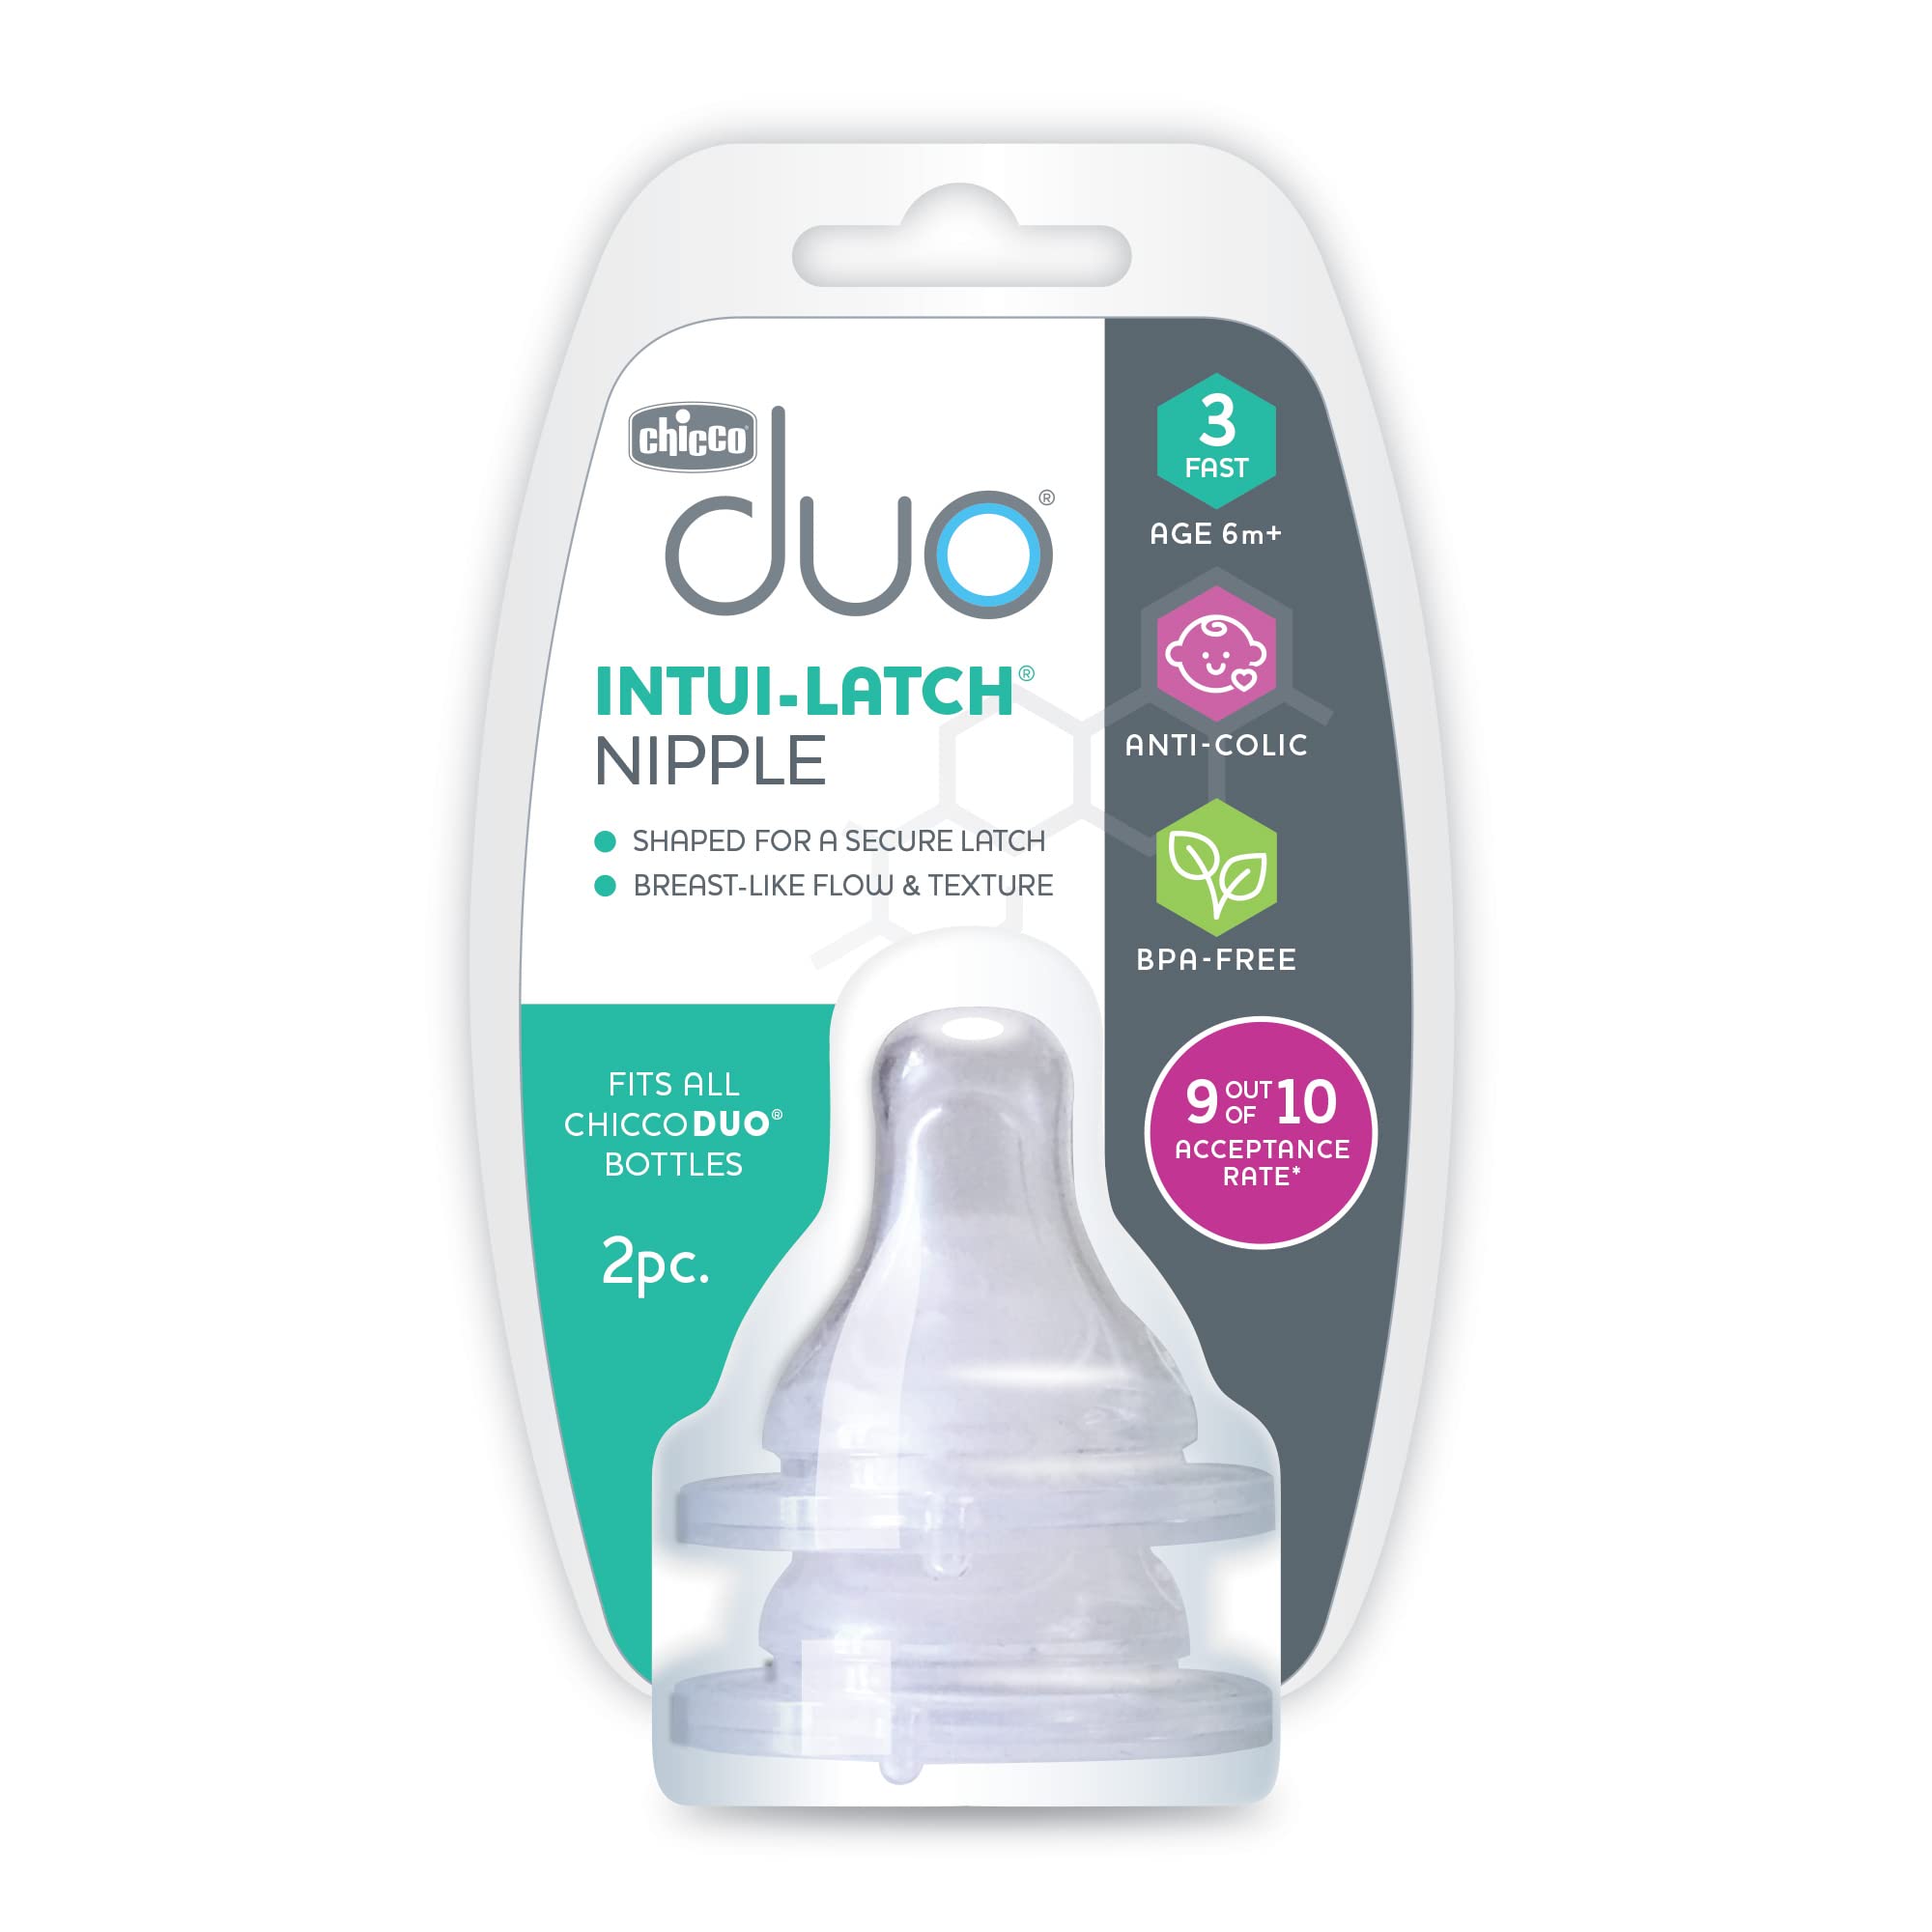 Chicco Duo 100% Silicone Intui-Latch Baby Bottle Nipple with Anti-Colic Valve | Skin-Like Texture and Breast-Like Flow | Stage 3, Fast Flow | 2pk | 6+ Months